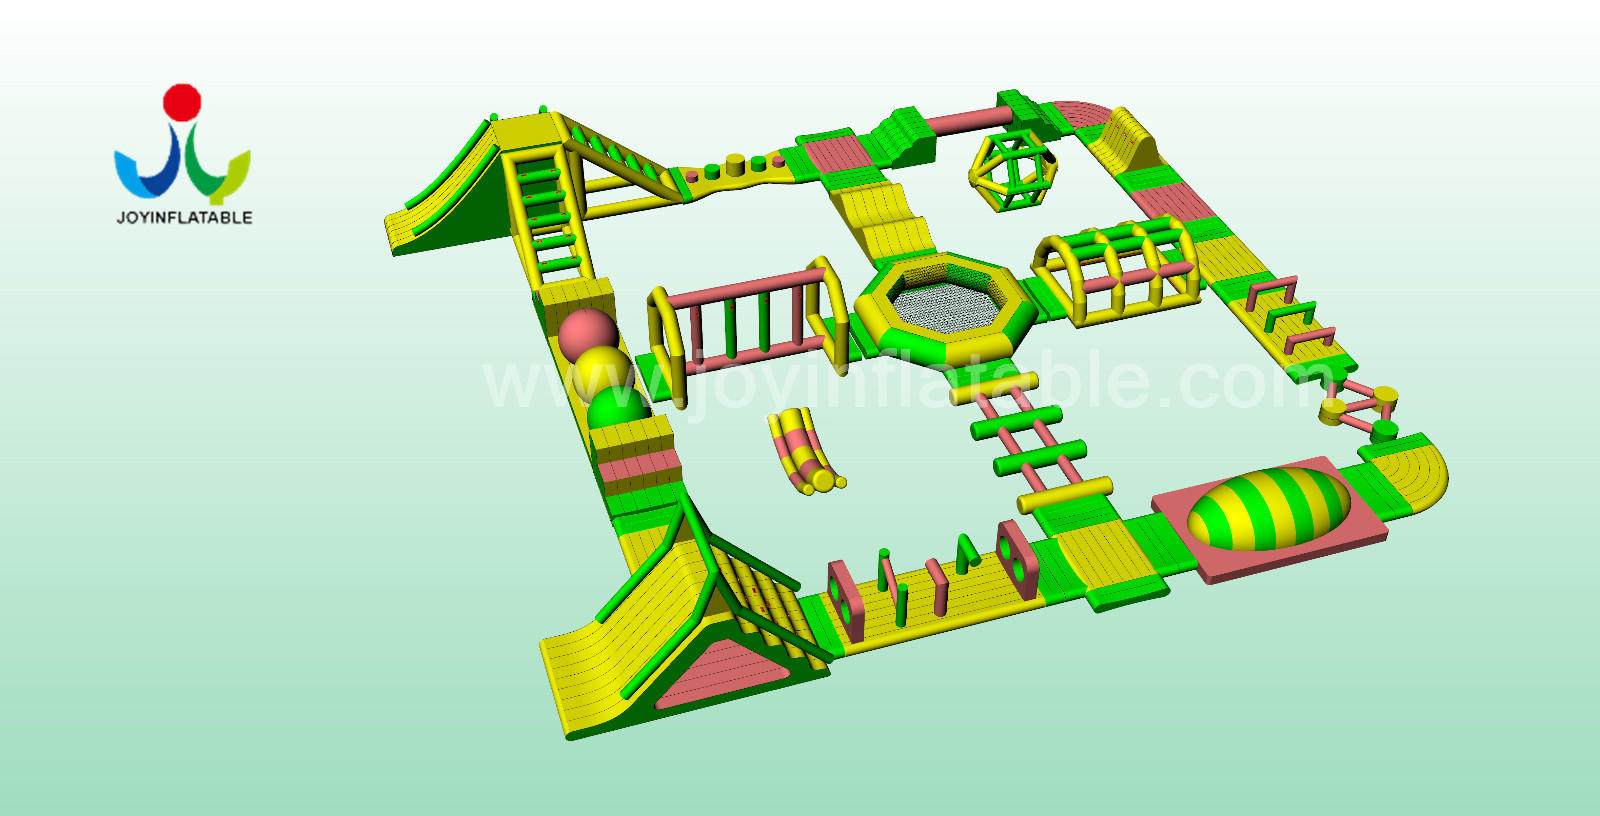 reliable kids inflatable water park series for kids JOY inflatable